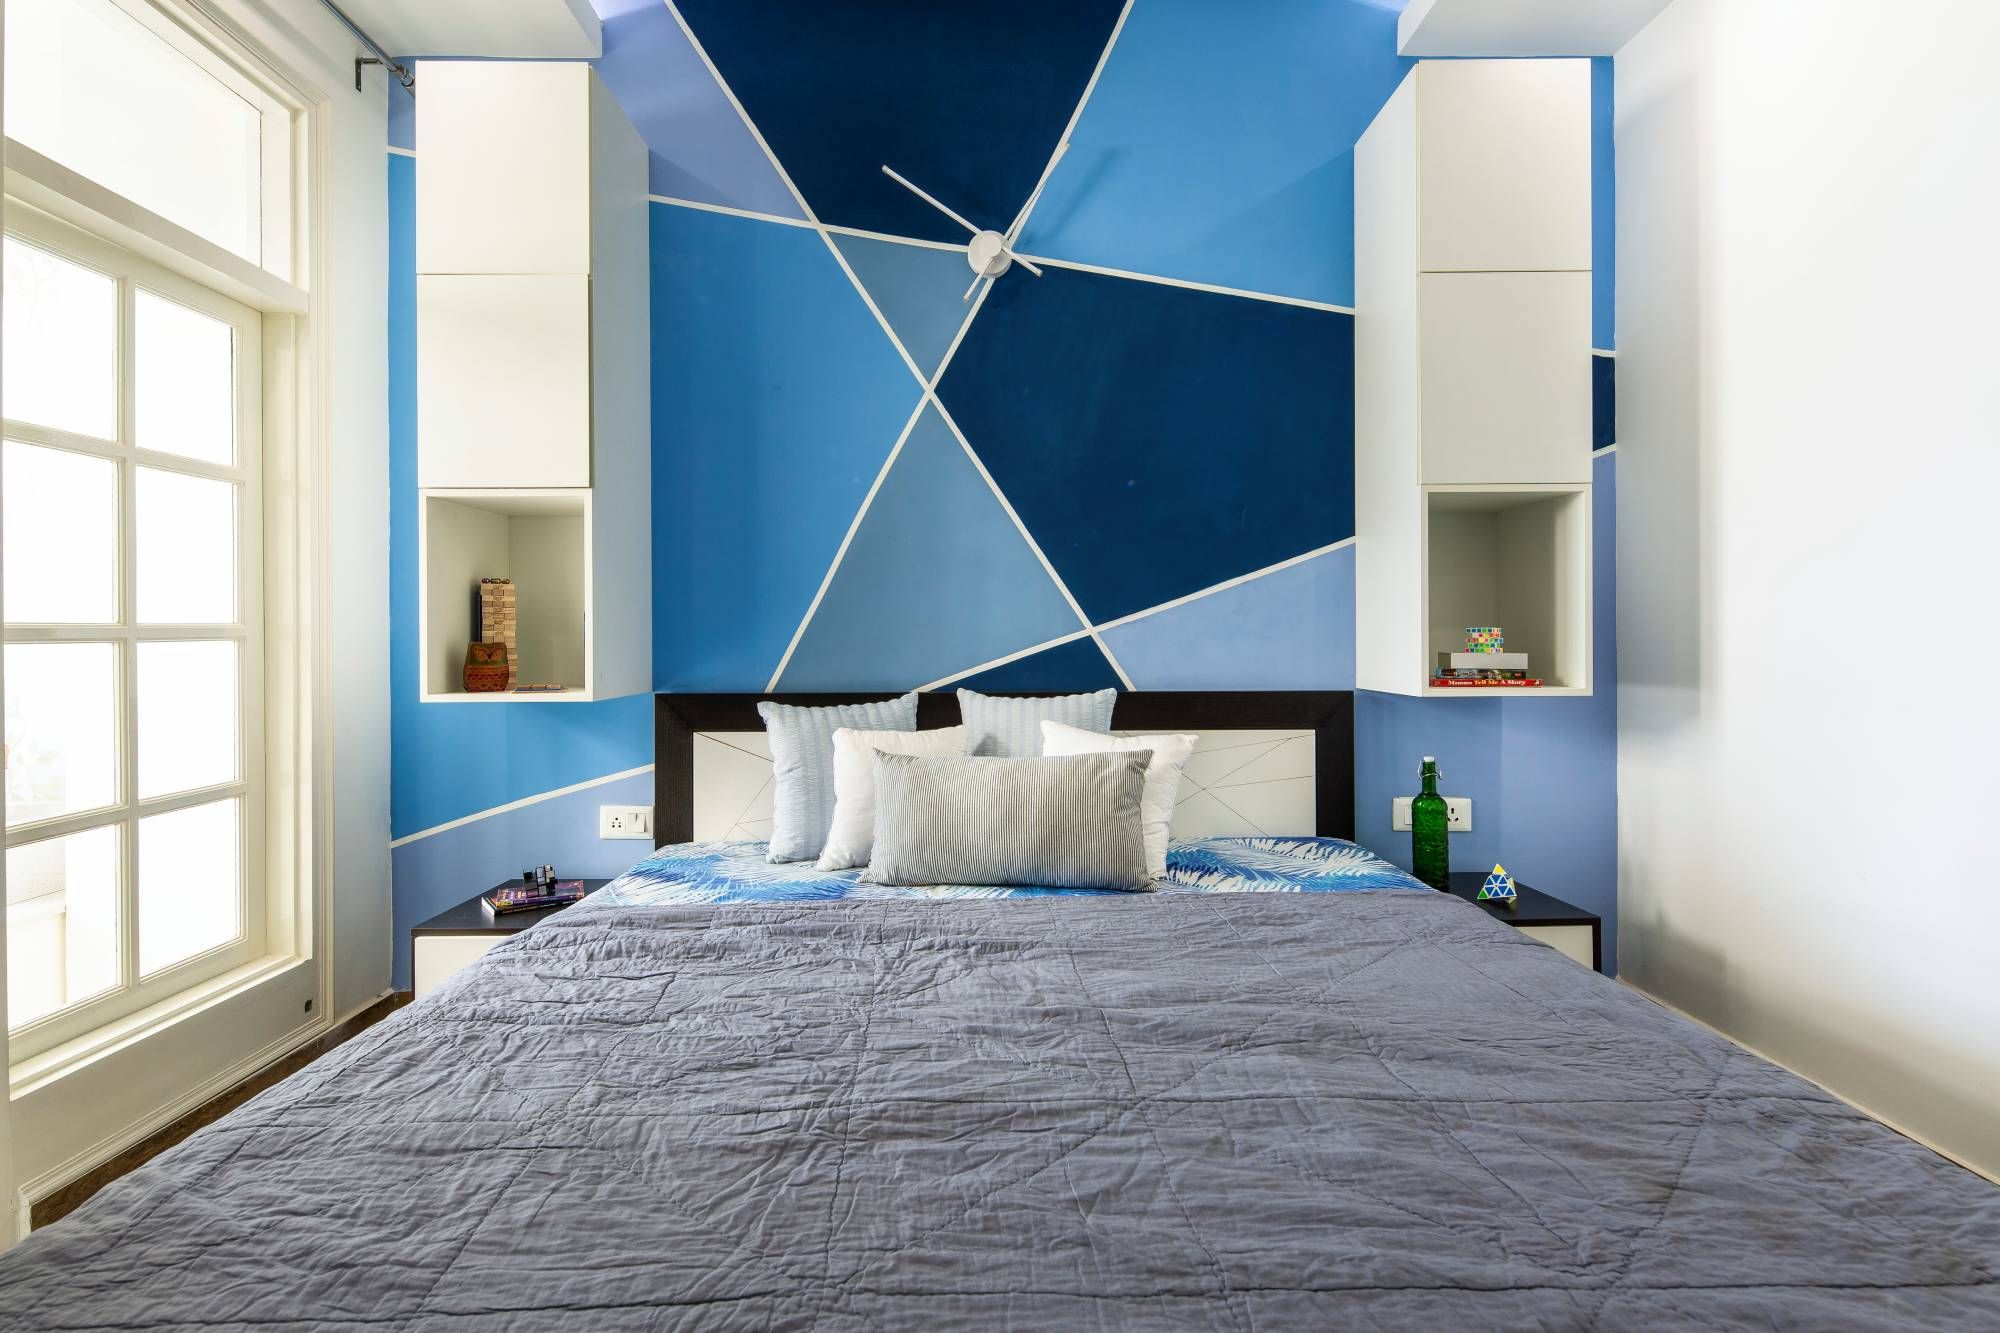 Modern Kids Room Design With A Double Bed And White Wall Storage Units